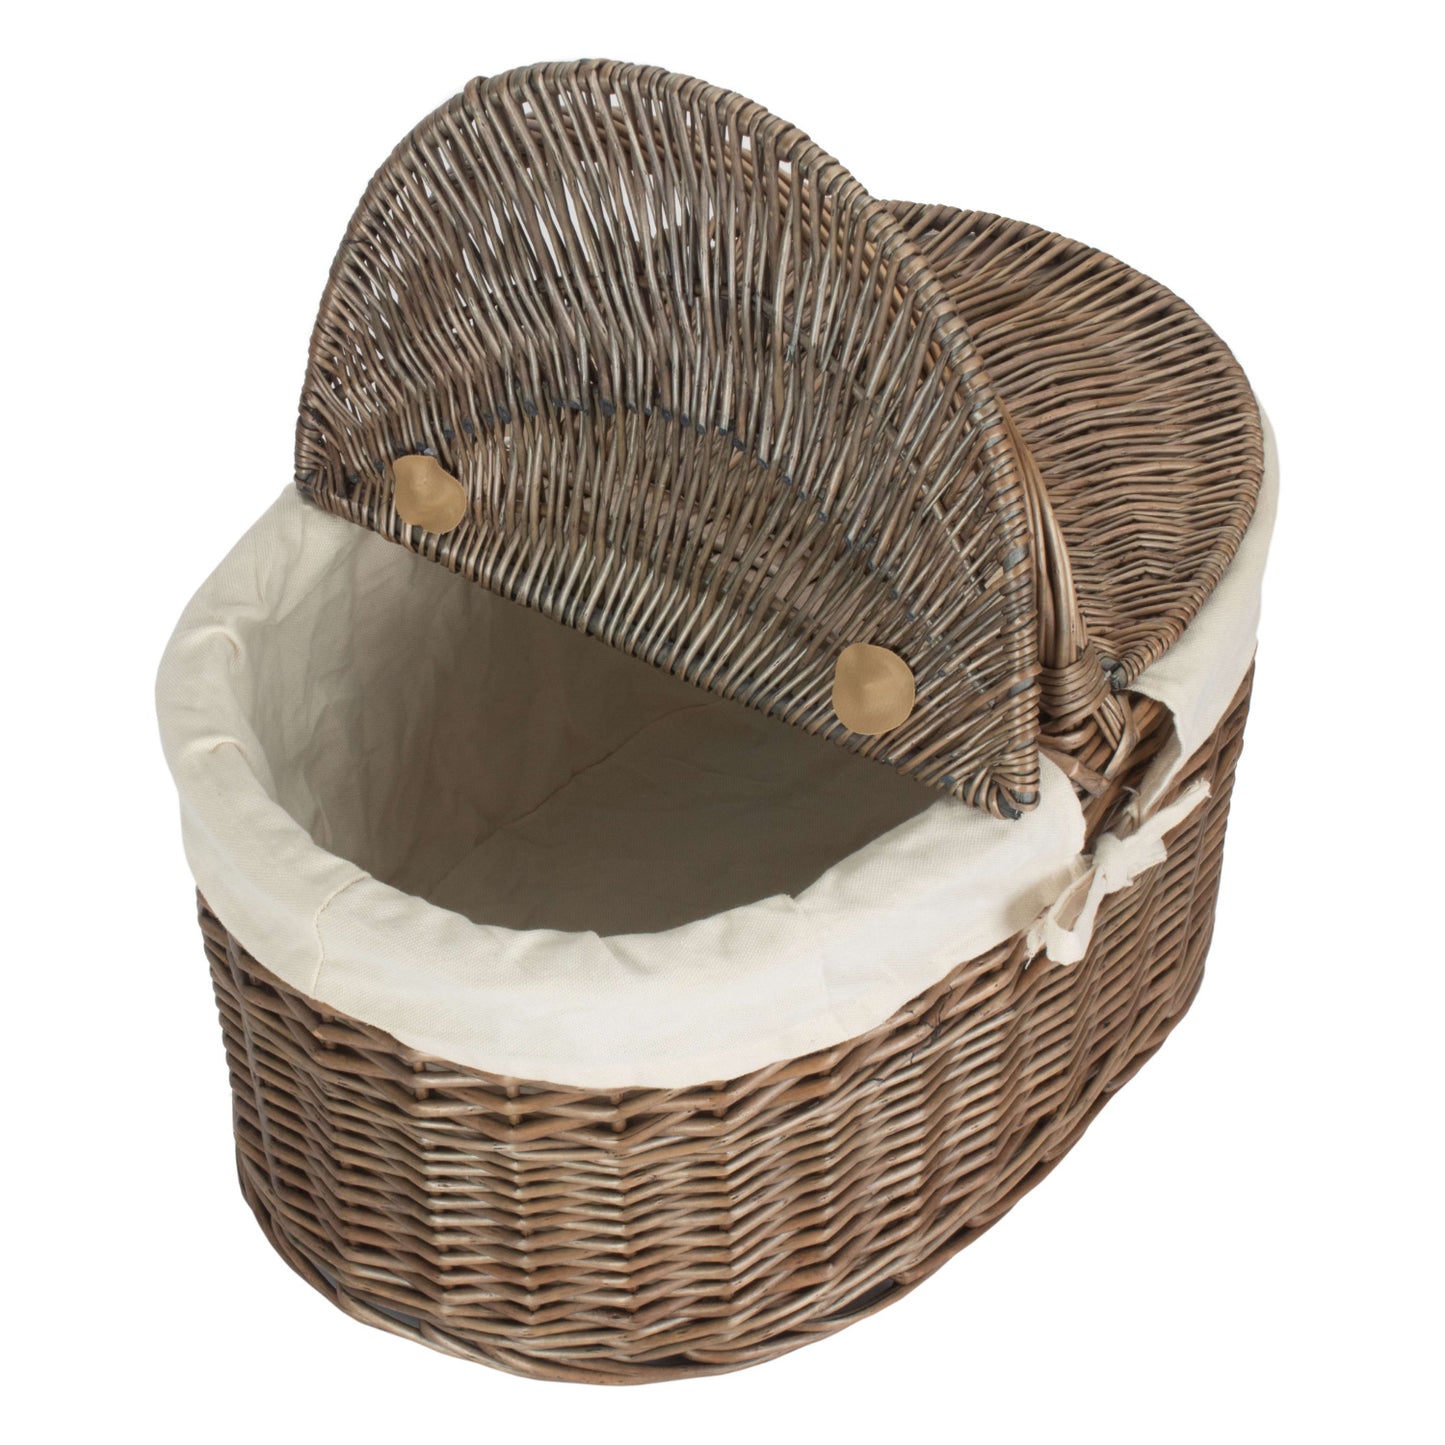 Deep Antique Wash Oval Picnic Basket With White Lining